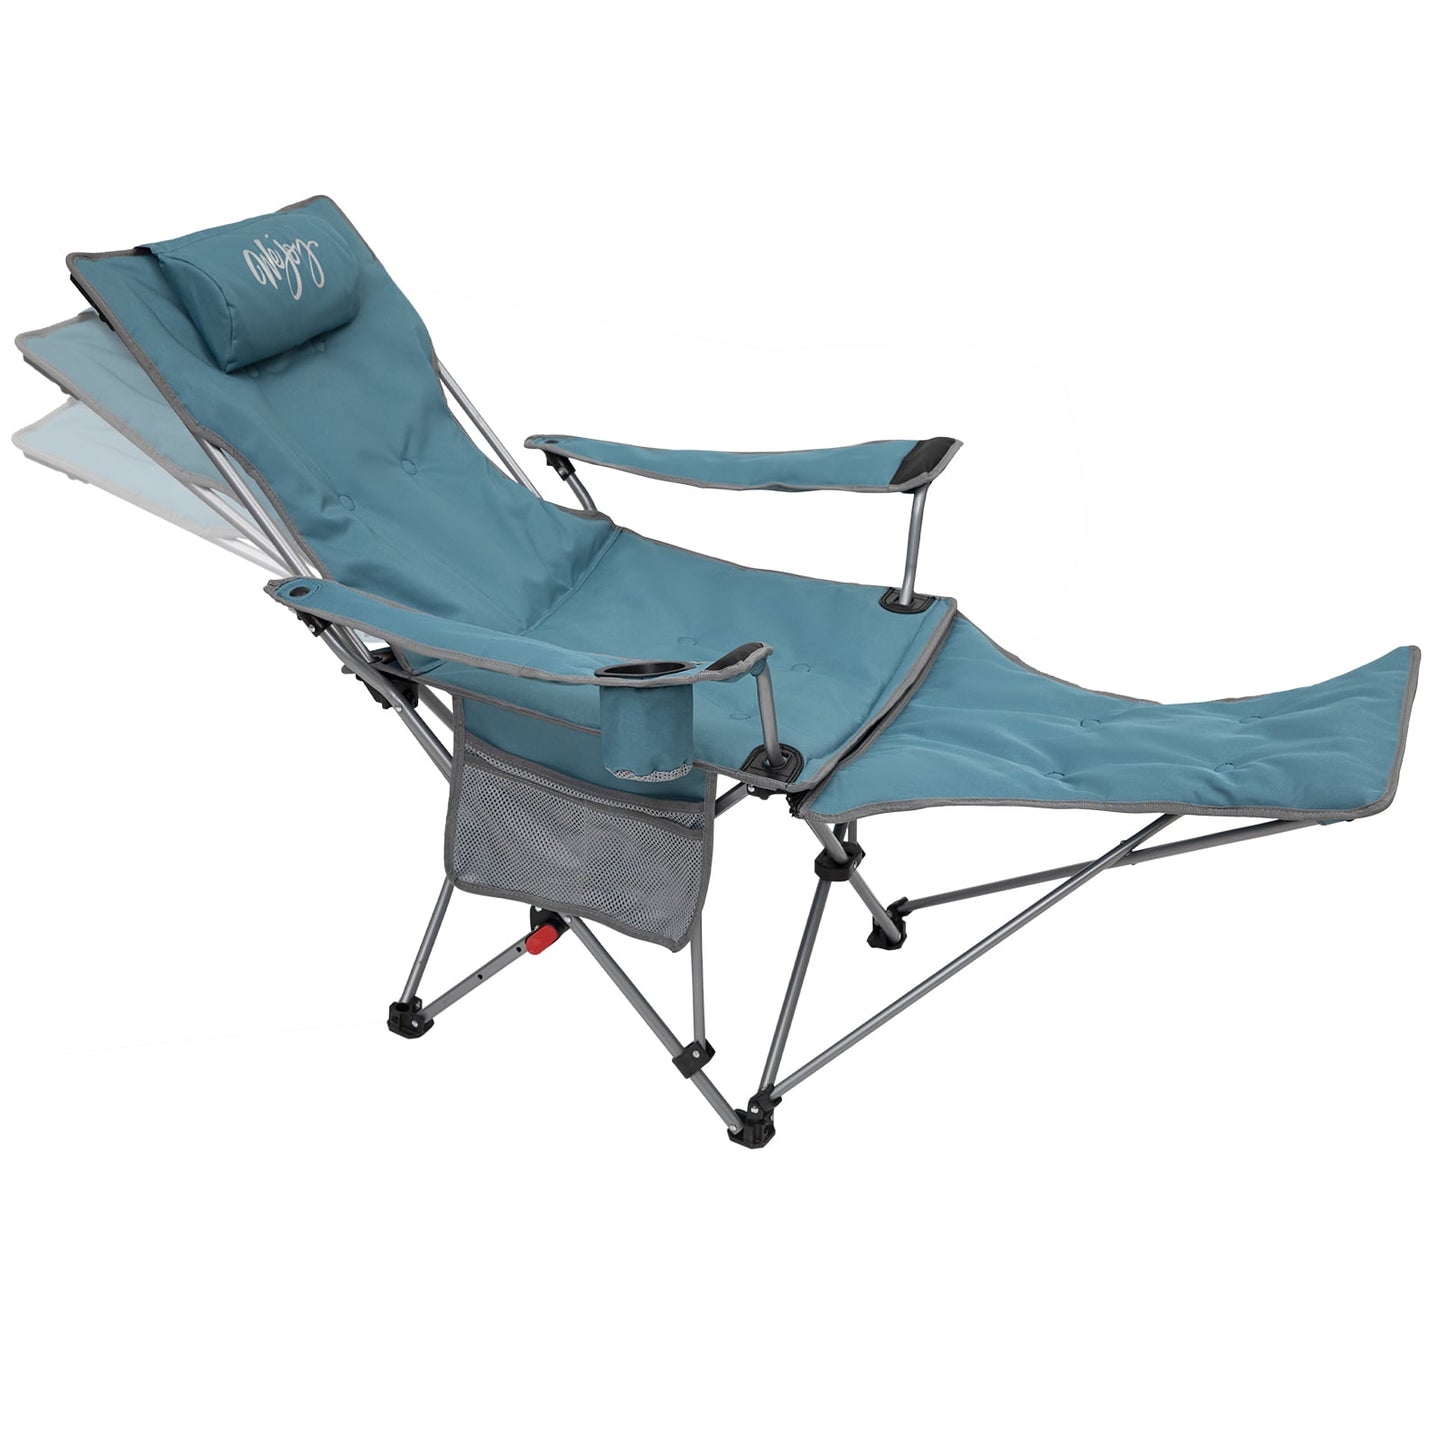 WEJOY Versatile 2-in-1 Padded 3-Position Adjustable Outdoor Folding Lounge Lawn Chair